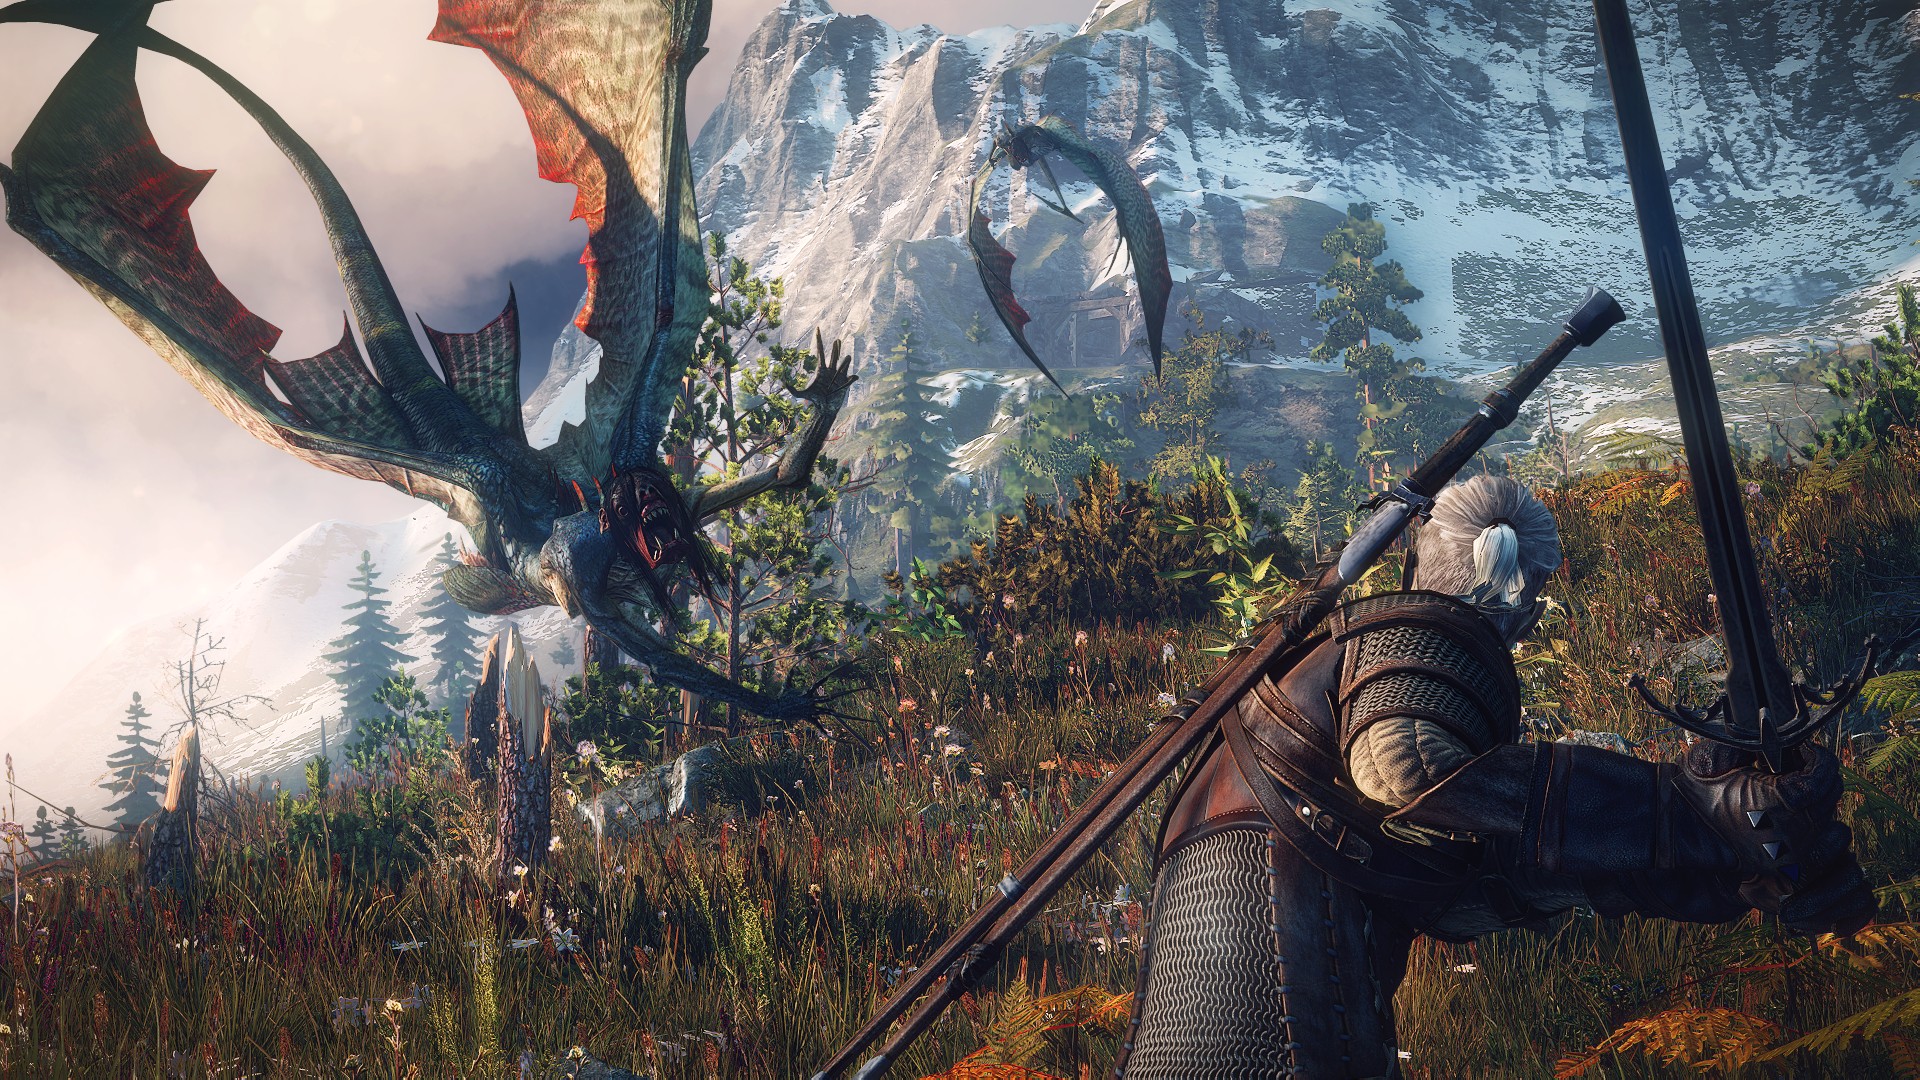 Media asset in full size related to 3dfxzone.it news item entitled as follows: Nuovi screenshot in Full HD del game RPG The Witcher 3: Wild Hunt | Image Name: news19716_The-Witcher-3-Wild-Hunt_6.jpg